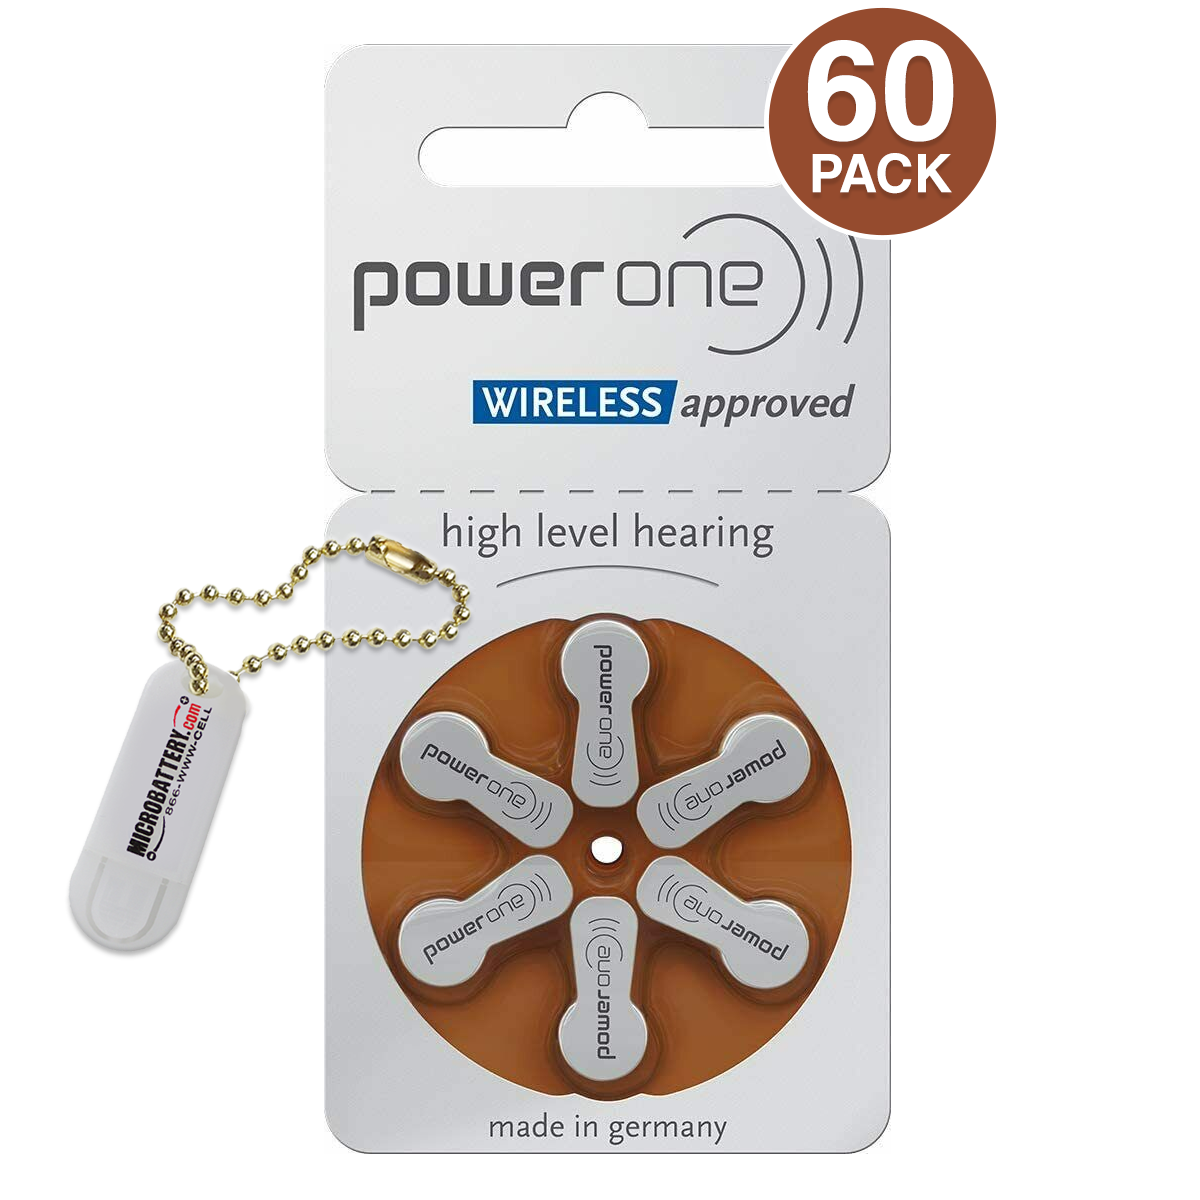 60 Power One Size 312 Hearing Aid Batteries + Free Keychain/2 Extra Batteries